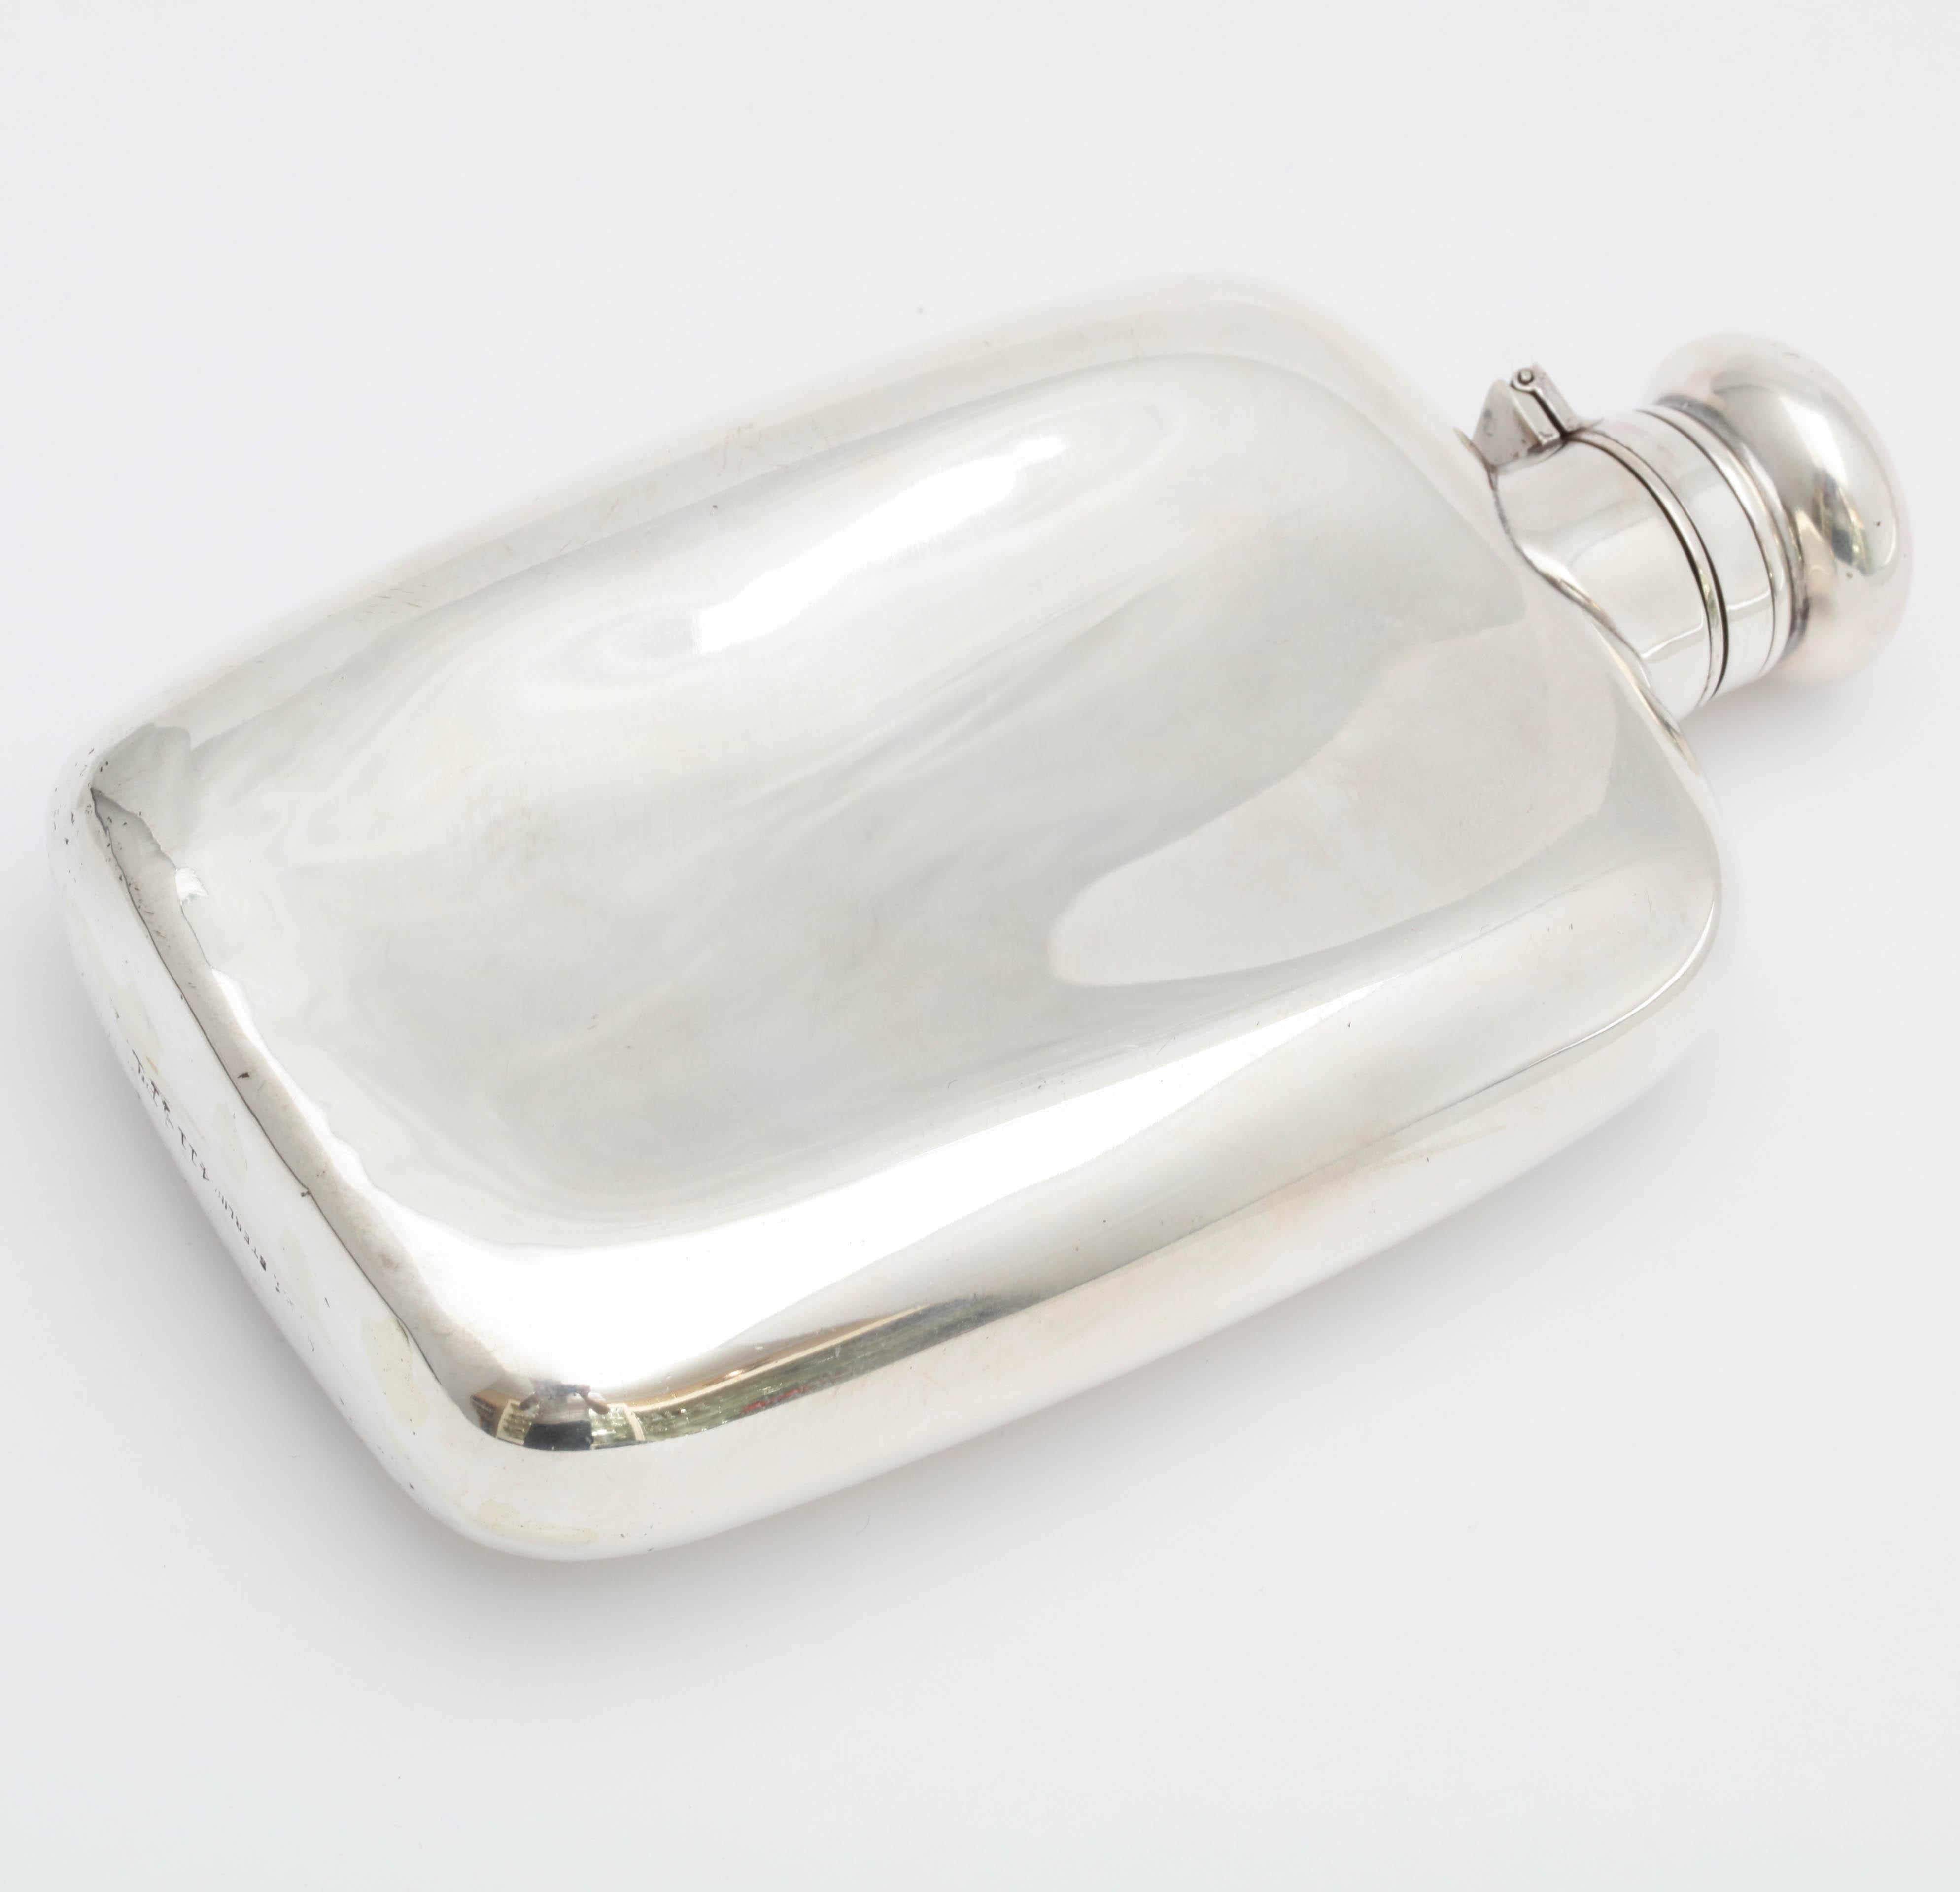 Edwardian, sterling silver flask with hinged lid, R. Wallace & Sons Co., Wallingford, Ct., circa 1910. Measures 5 3/4 inches tall x 3 1/4 inches wide x 1 1/8 inches deep; weighs 4.385 troy ounces. Nice, clean lines. Closure of hinged lid is bayonet